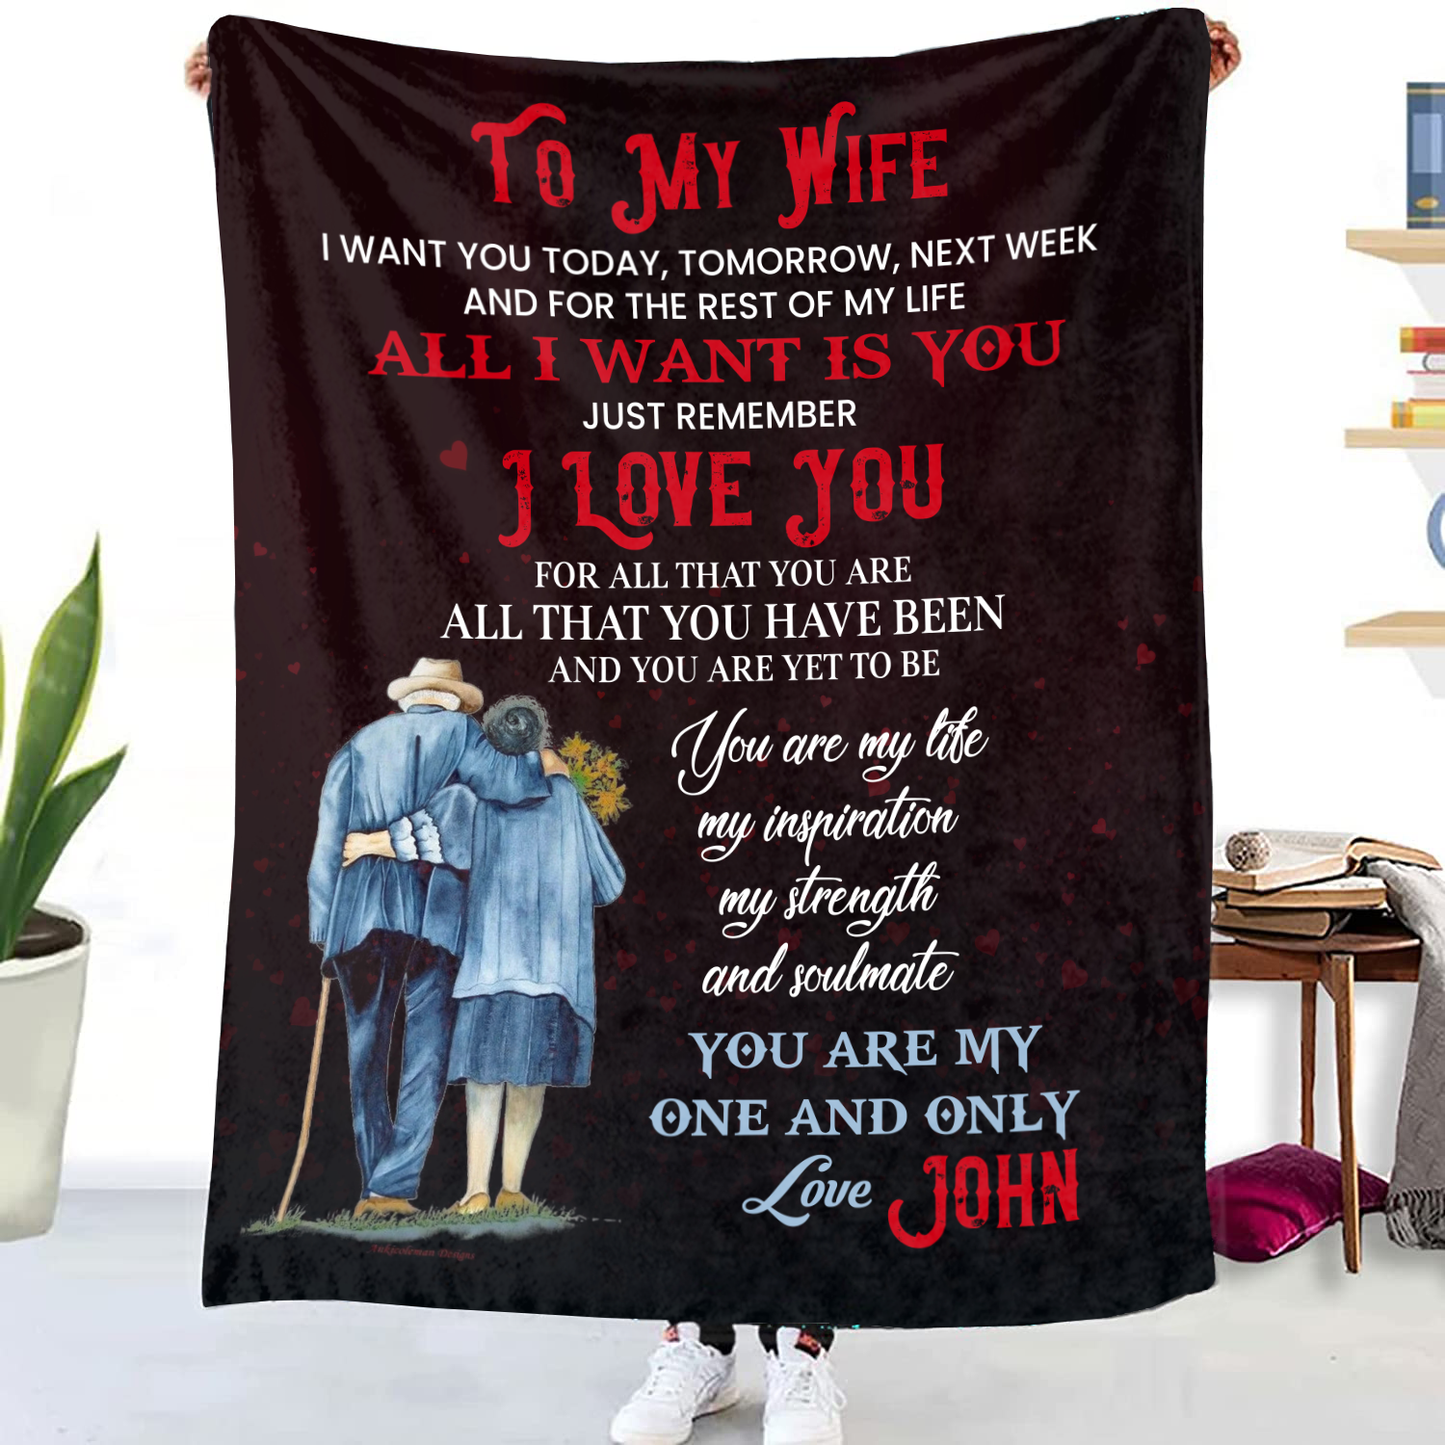 To my Wife - I Want You Personalized Premium Mink Sherpa Blanket 50x60